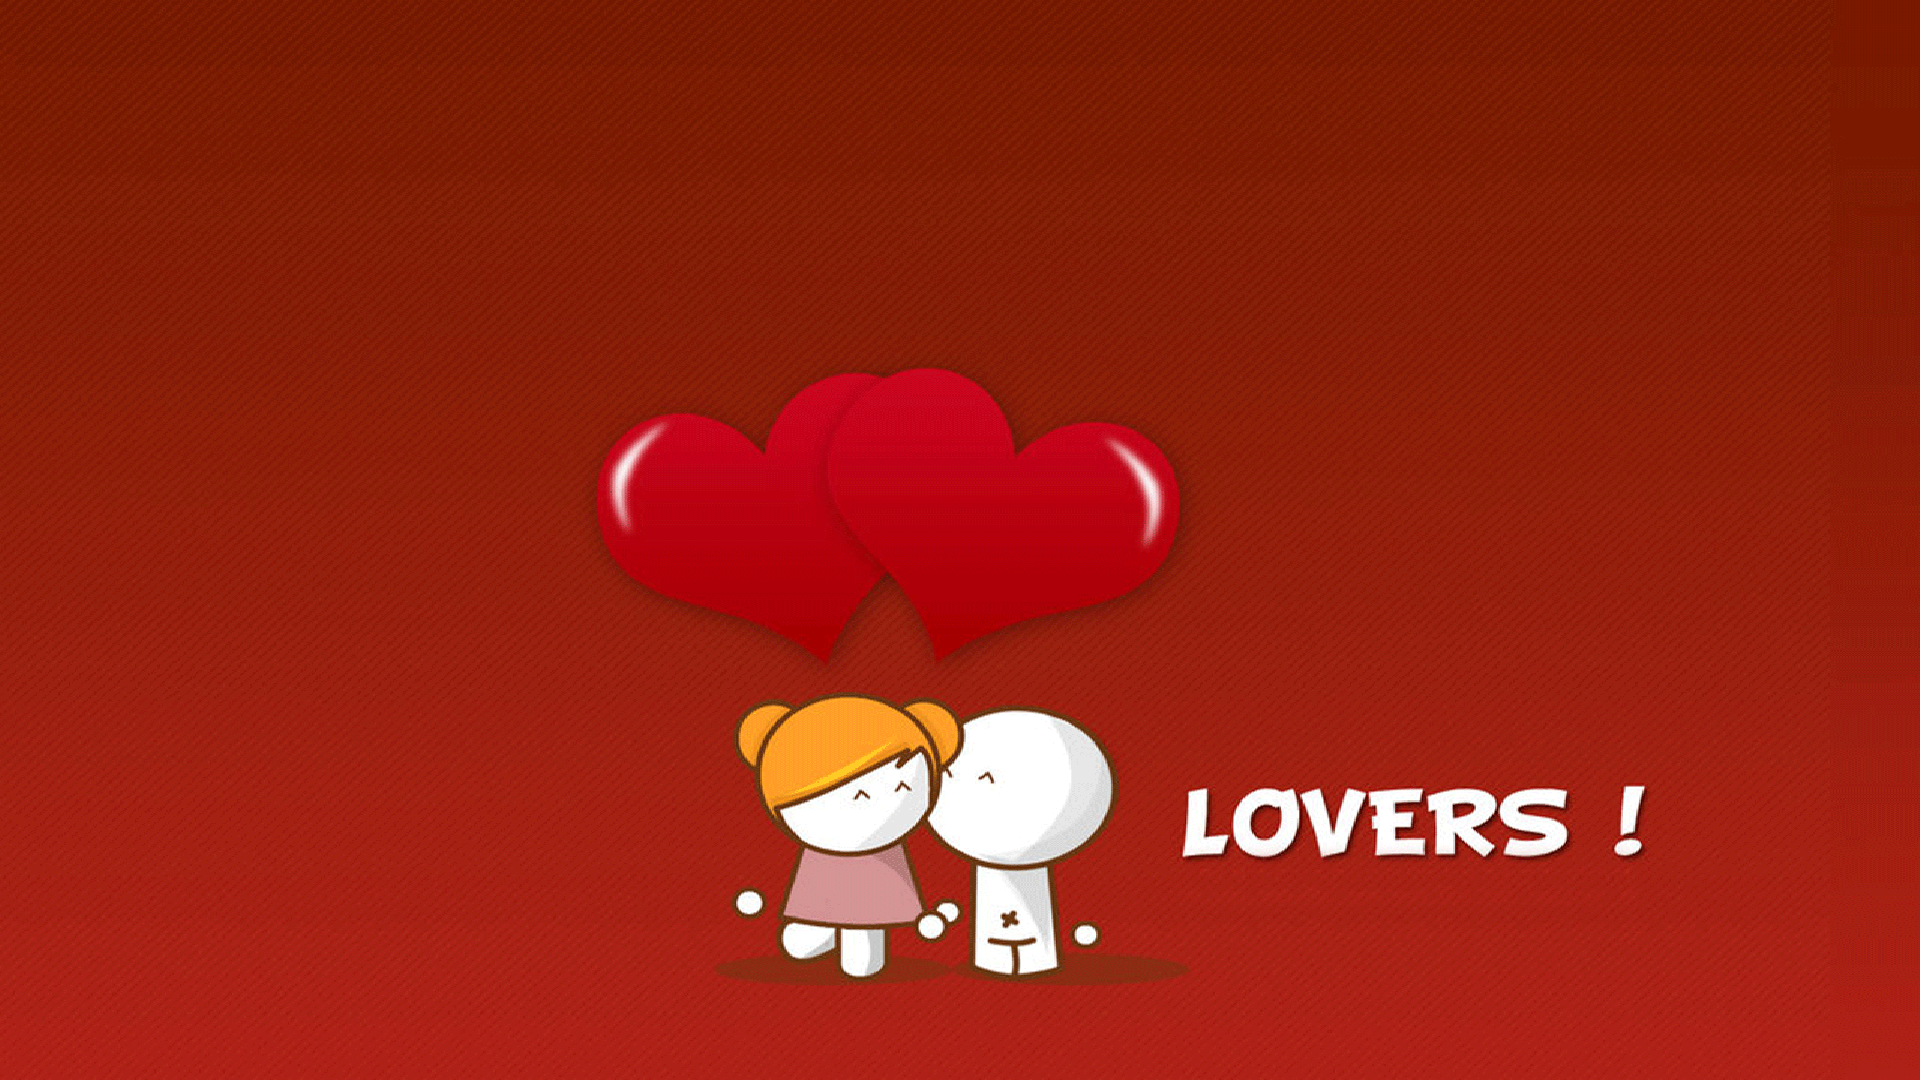 I Love You Wallpaper, Picture to Express Your Love For Someone